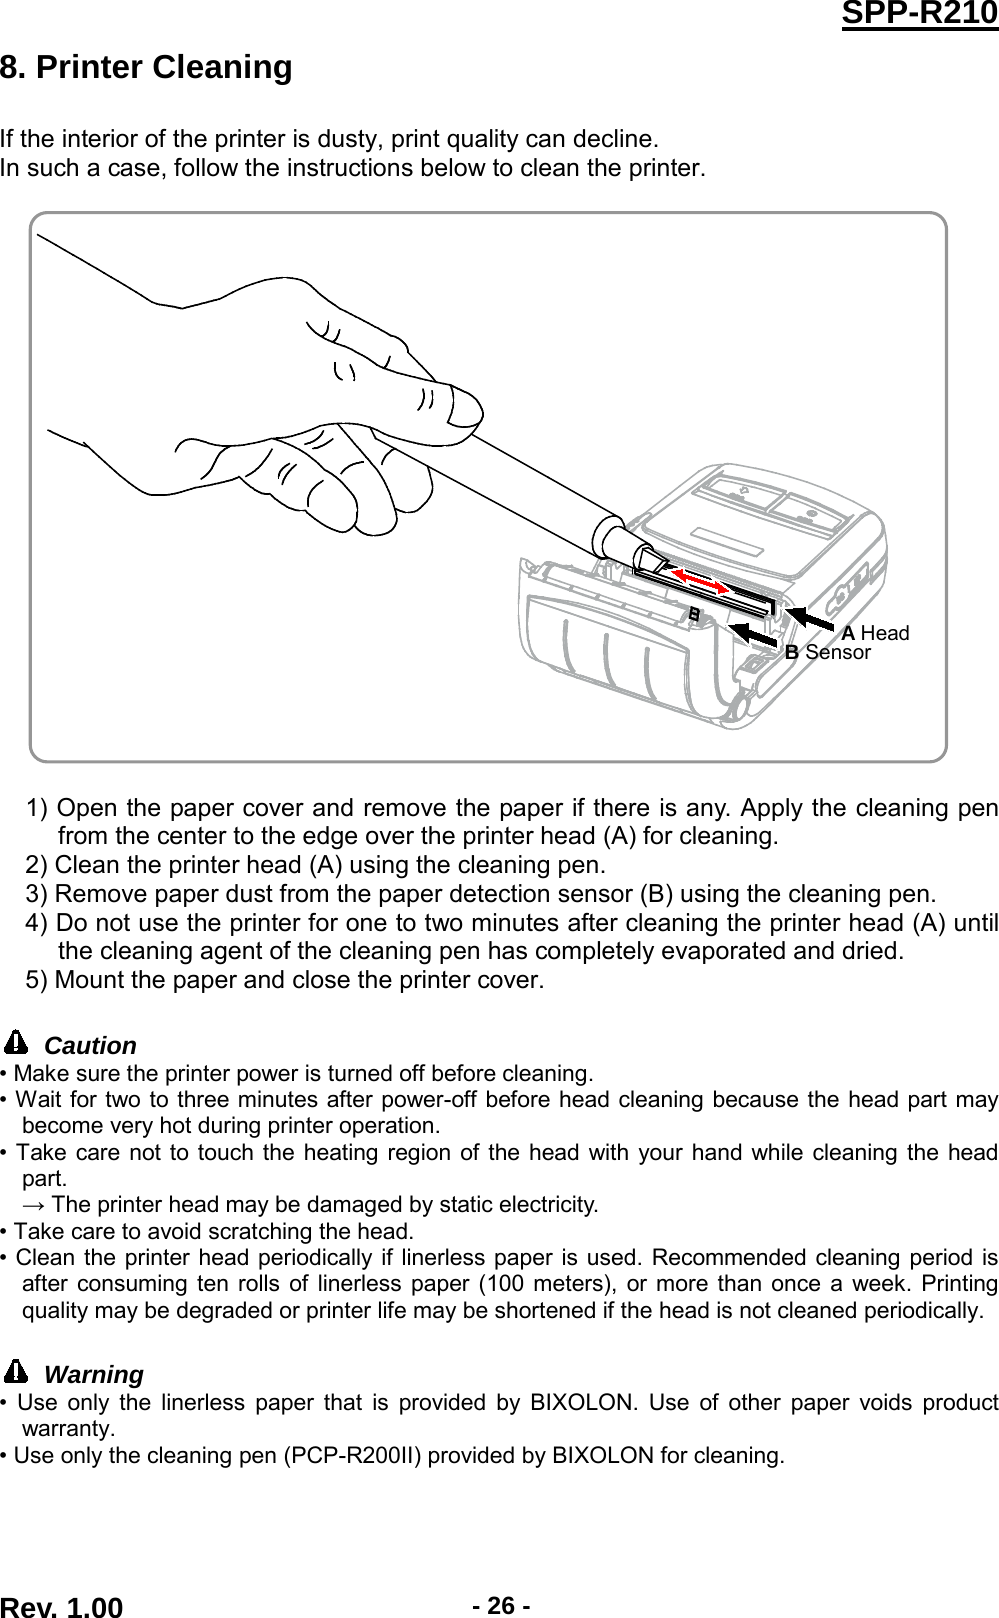  SPP-R210 8. Printer Cleaning If the interior of the printer is dusty, print quality can decline. In such a case, follow the instructions below to clean the printer.    1) Open the paper cover and remove the paper if there is any. Apply the cleaning pen from the center to the edge over the printer head (A) for cleaning. 2) Clean the printer head (A) using the cleaning pen. 3) Remove paper dust from the paper detection sensor (B) using the cleaning pen. 4) Do not use the printer for one to two minutes after cleaning the printer head (A) until the cleaning agent of the cleaning pen has completely evaporated and dried. 5) Mount the paper and close the printer cover.   Caution • Make sure the printer power is turned off before cleaning. • Wait for two to three minutes after power-off before head cleaning because the head part may become very hot during printer operation. • Take care not to touch the heating region of the head with your hand while cleaning the head part.   → The printer head may be damaged by static electricity. • Take care to avoid scratching the head. • Clean the printer head periodically if linerless paper is used. Recommended cleaning period is after consuming ten rolls of linerless paper (100 meters), or more than once a week. Printing quality may be degraded or printer life may be shortened if the head is not cleaned periodically.   Warning • Use only the linerless paper that is provided by BIXOLON. Use of other paper voids product warranty. • Use only the cleaning pen (PCP-R200II) provided by BIXOLON for cleaning.    A Head B Sensor Rev. 1.00  - 26 - 